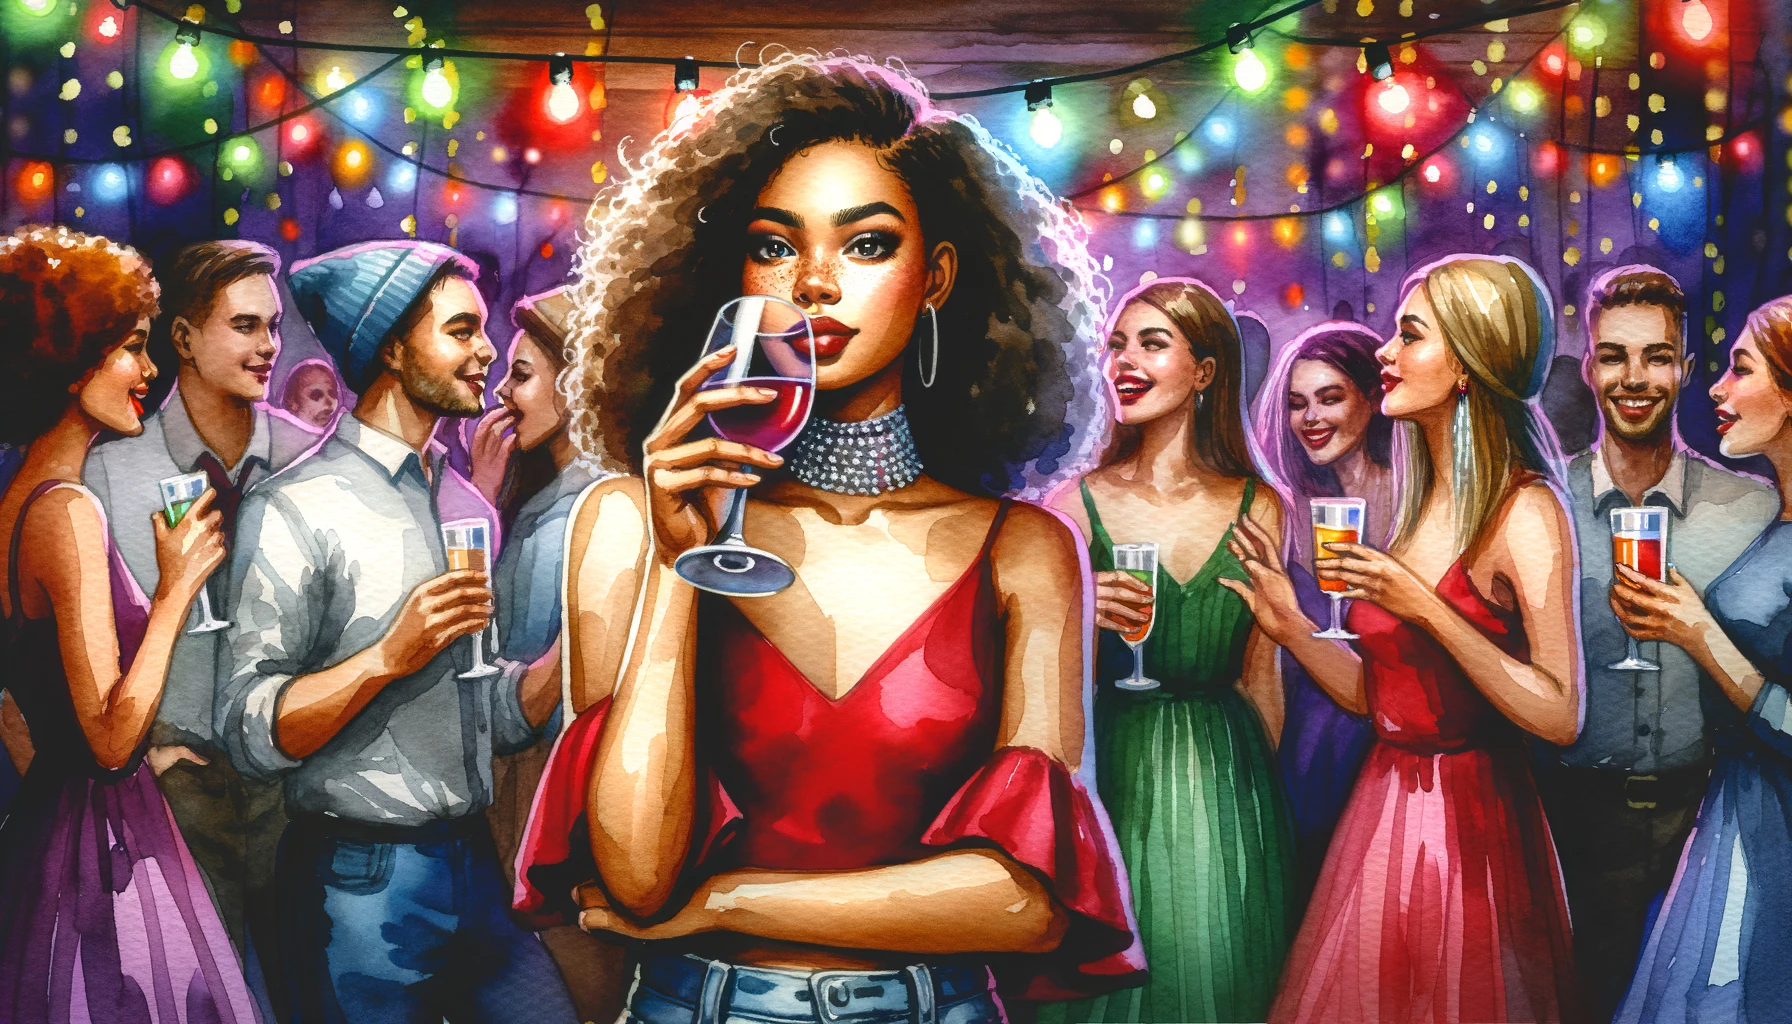 Festively dressed Christian woman drinks alcohol, surrounded by diverse friends dancing and laughing in a vibrant party scene with colorful lights.